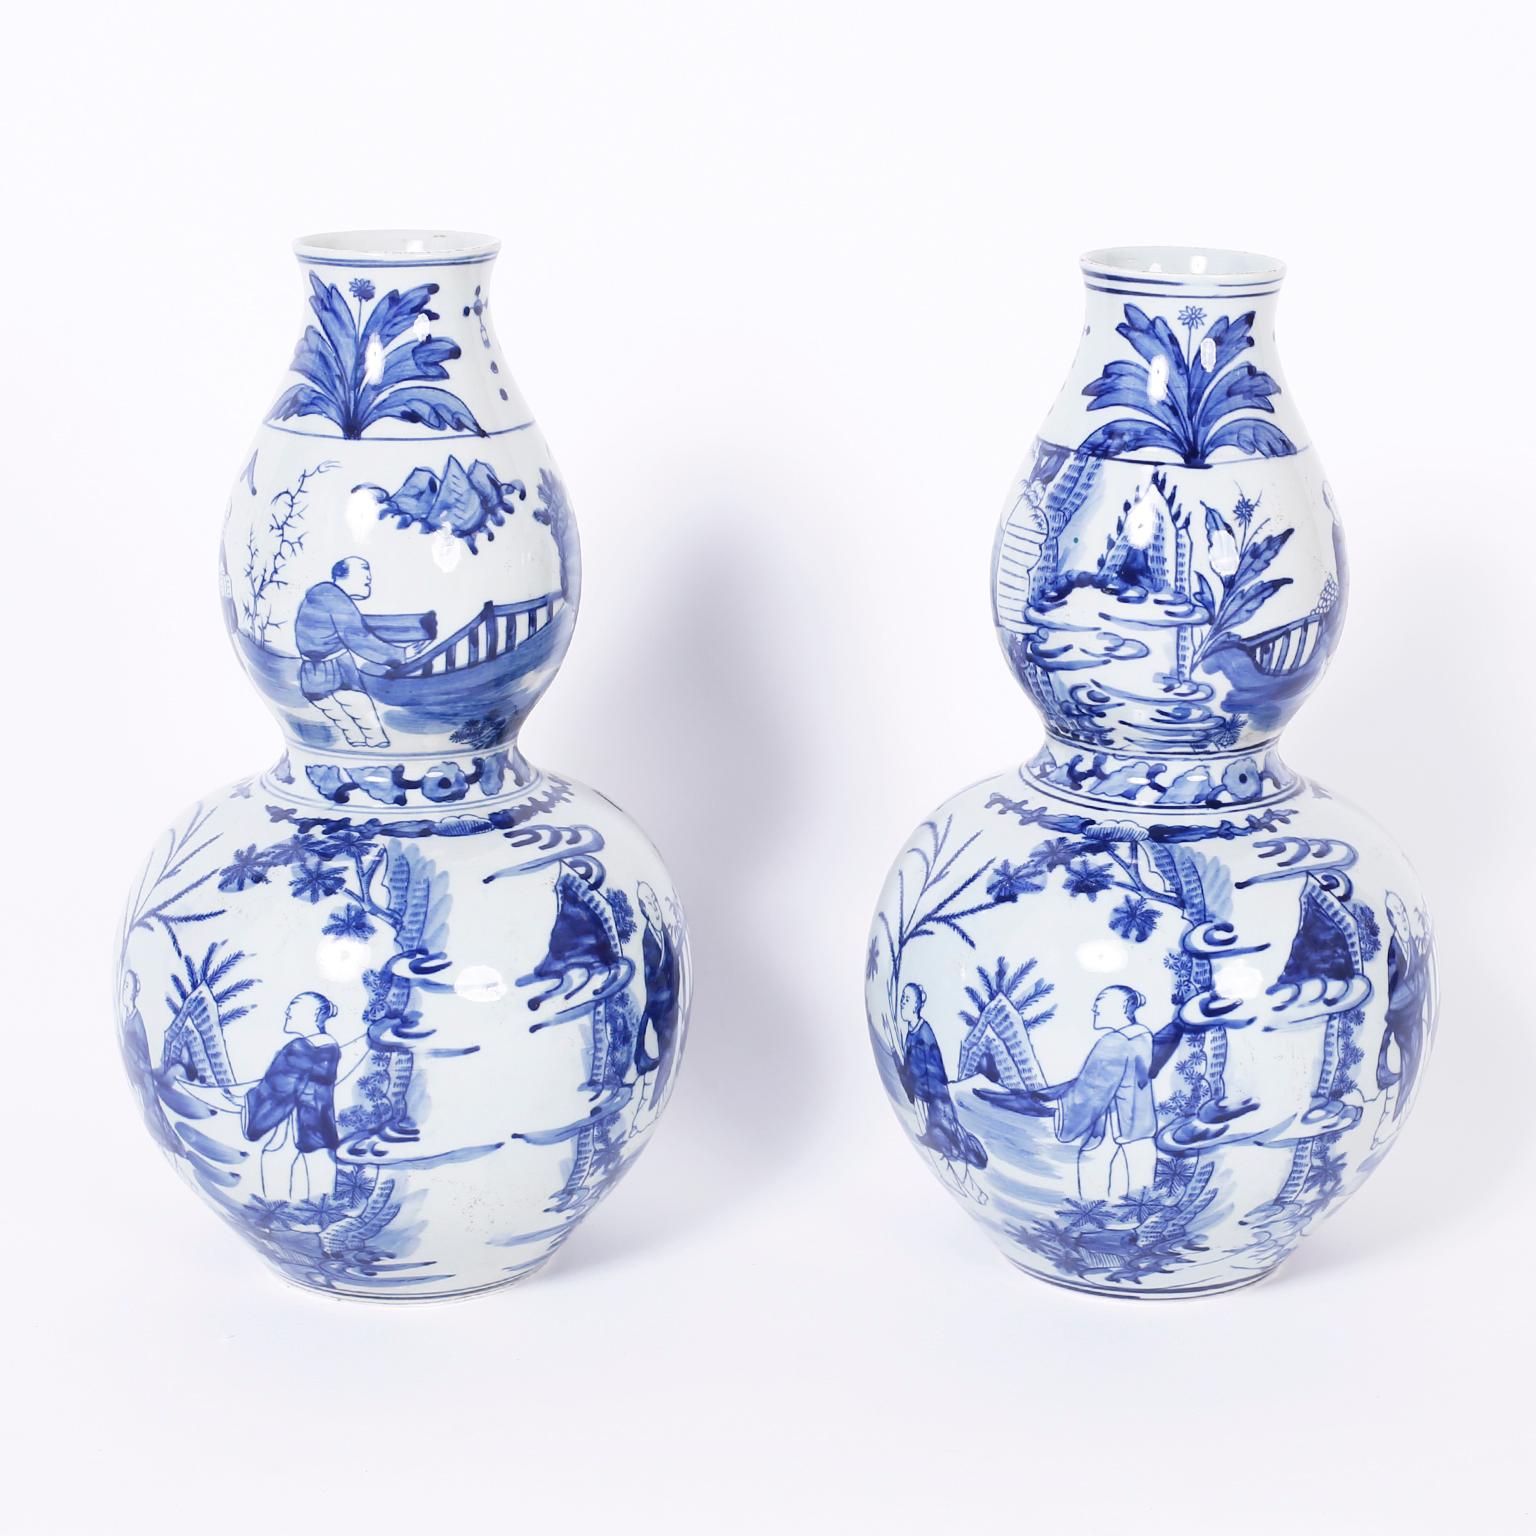 Charming pair of Chinese blue and white porcelain vases with a Classic double gourd form, hand decorated with figures in landscapes.